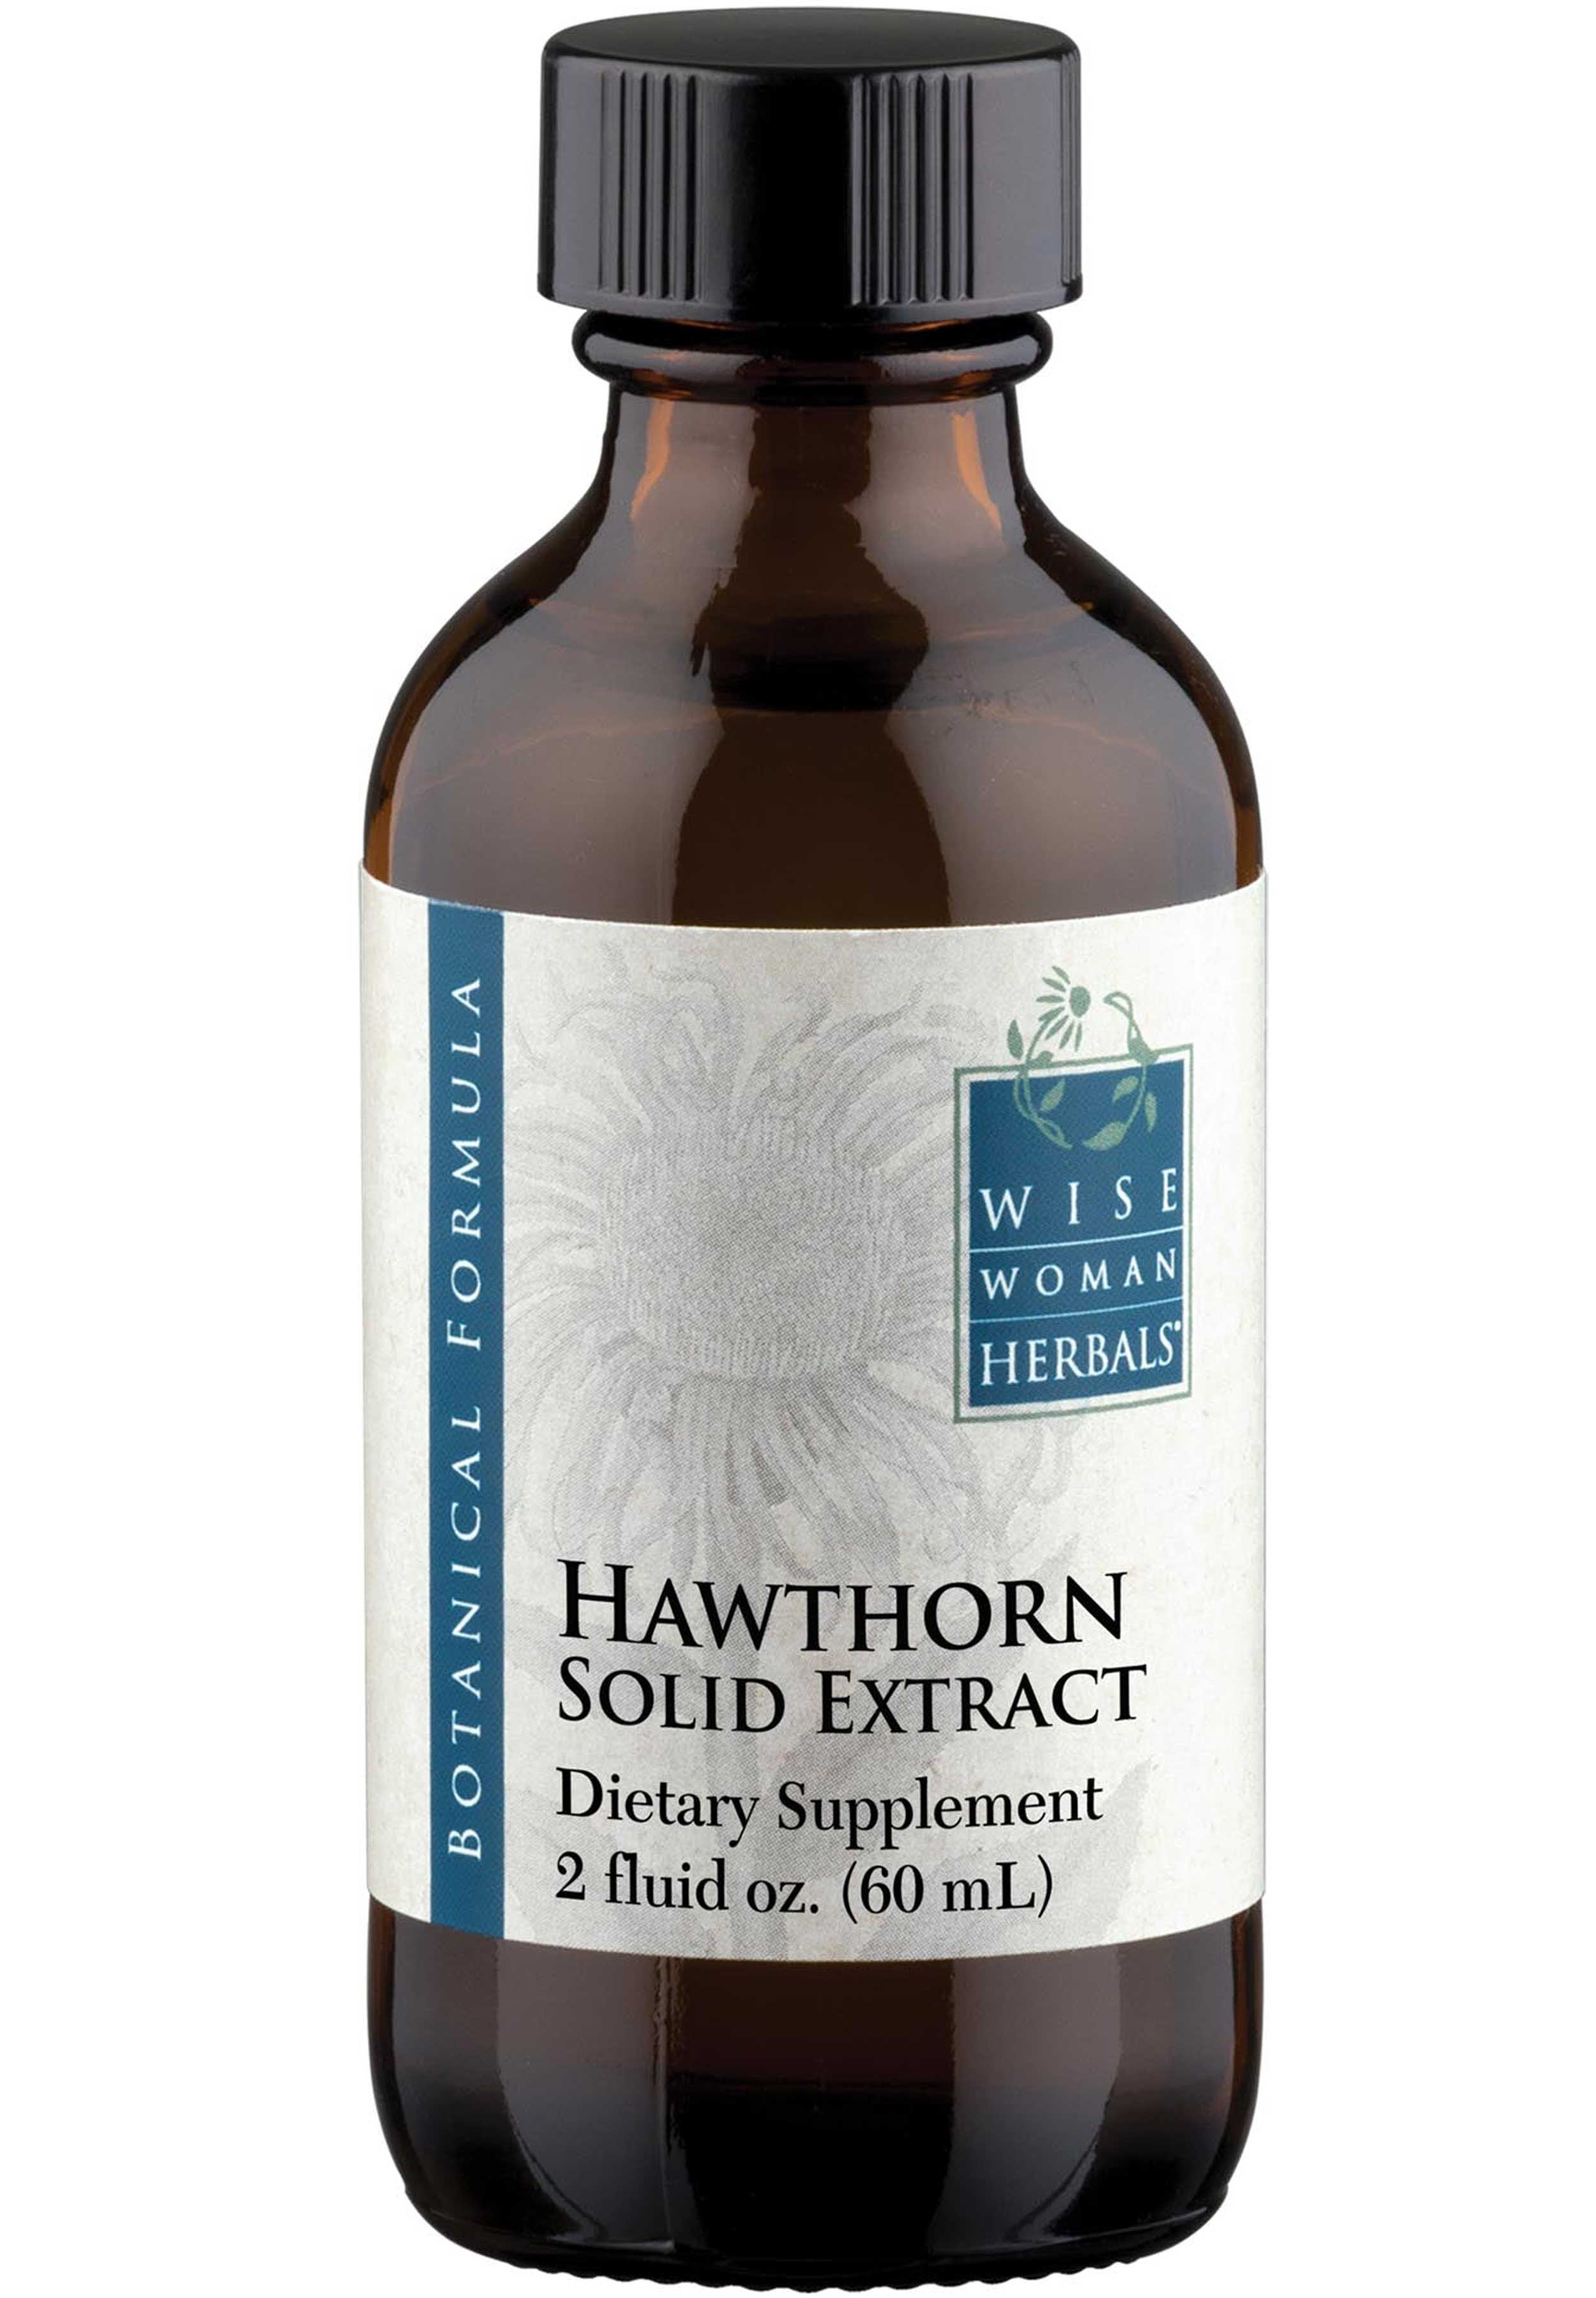 Wise Woman Herbals Hawthorn Solid Extract